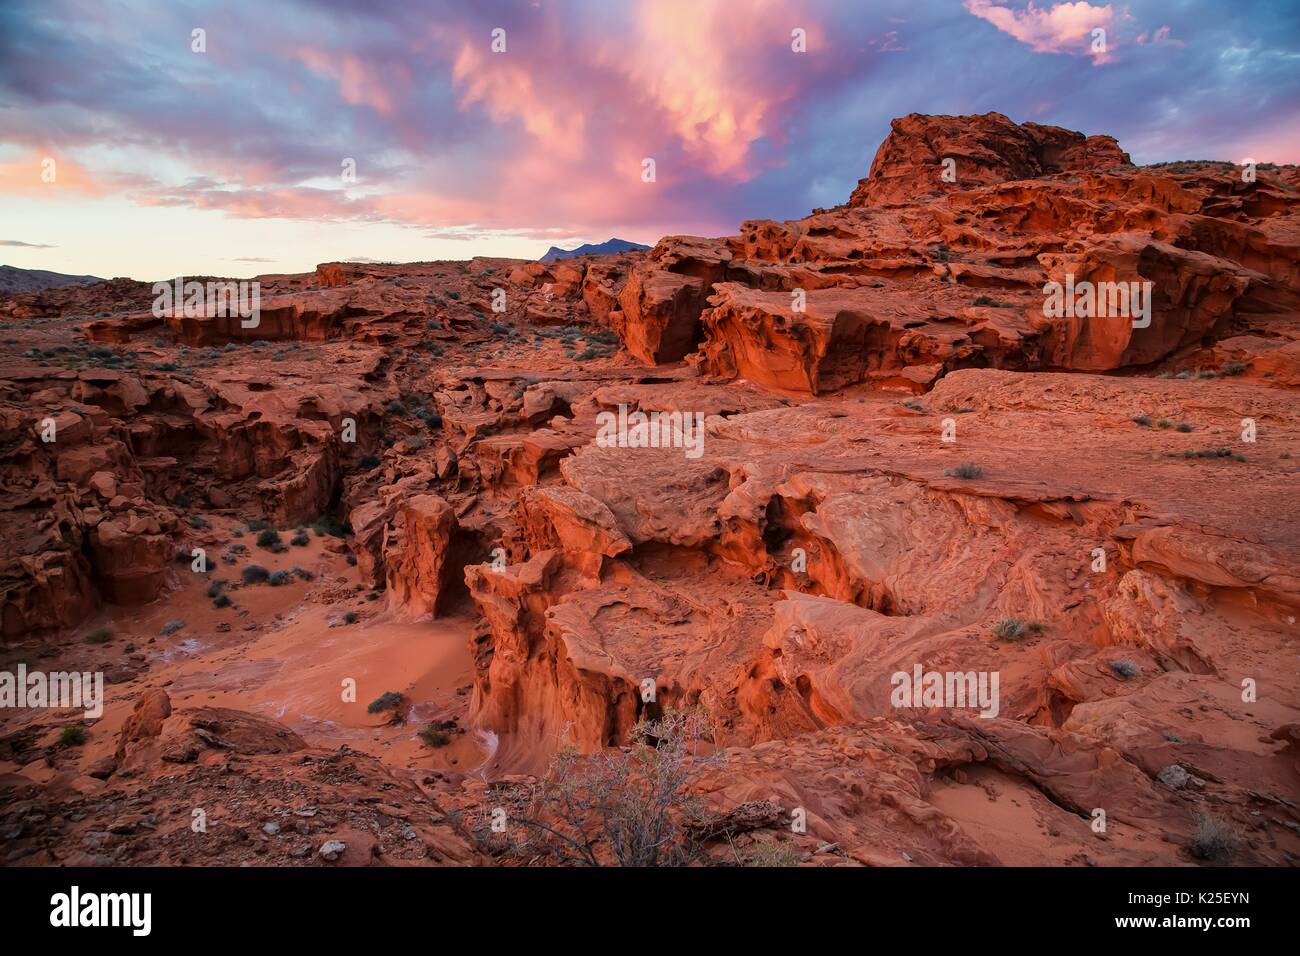 The sun sets over sandstone rock striations at the Little Finland formation at the Gold Butte National Monument September 27, 2016 near Mesquite, Nevada. Stock Photo